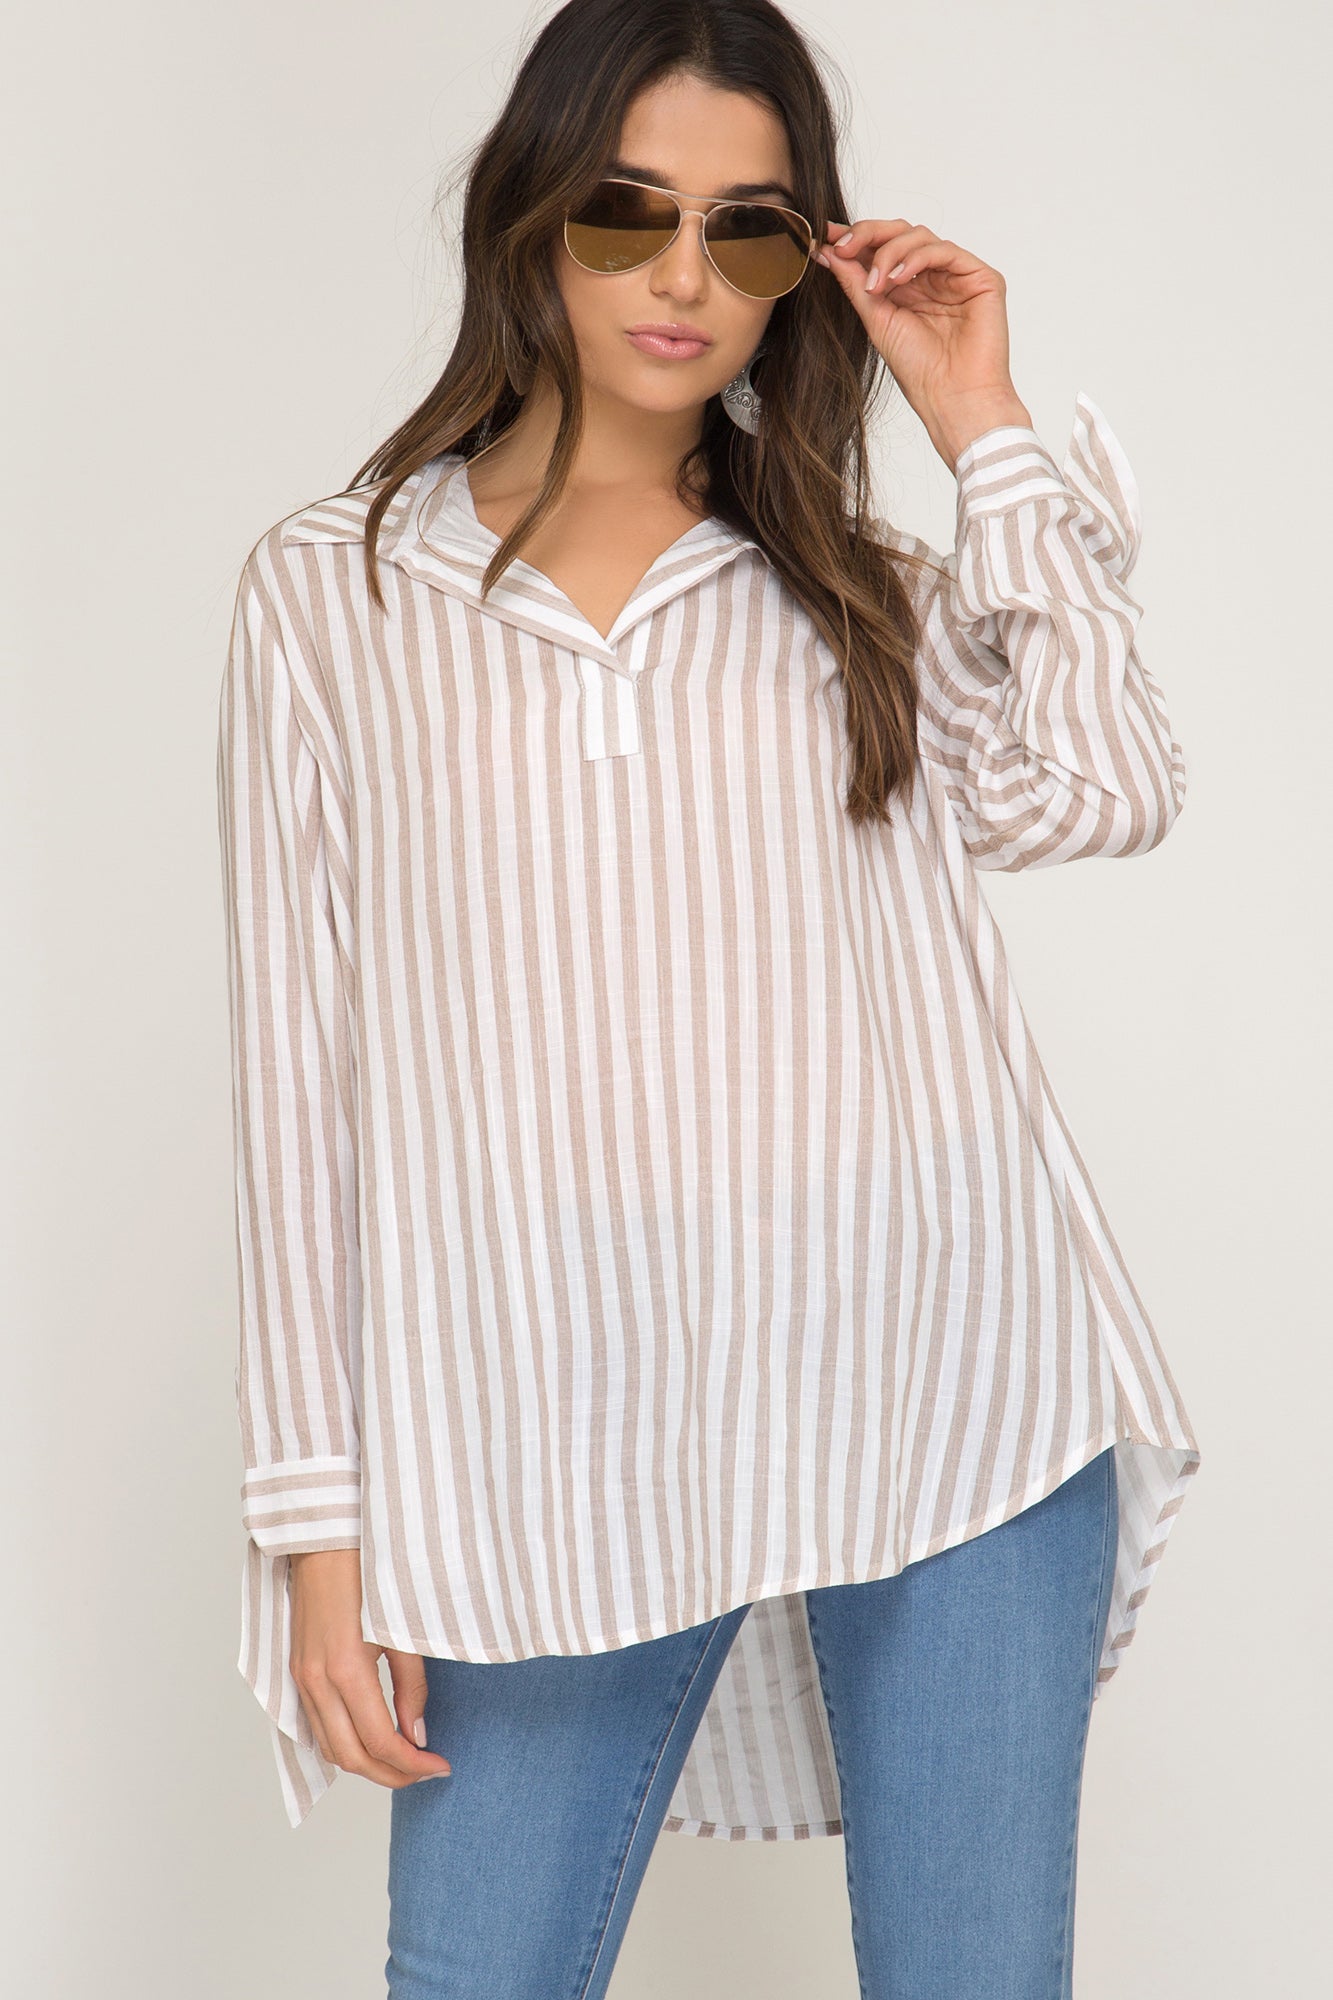 Quinn Striped Top - Corinne an Affordable Women's Clothing Boutique in the US USA